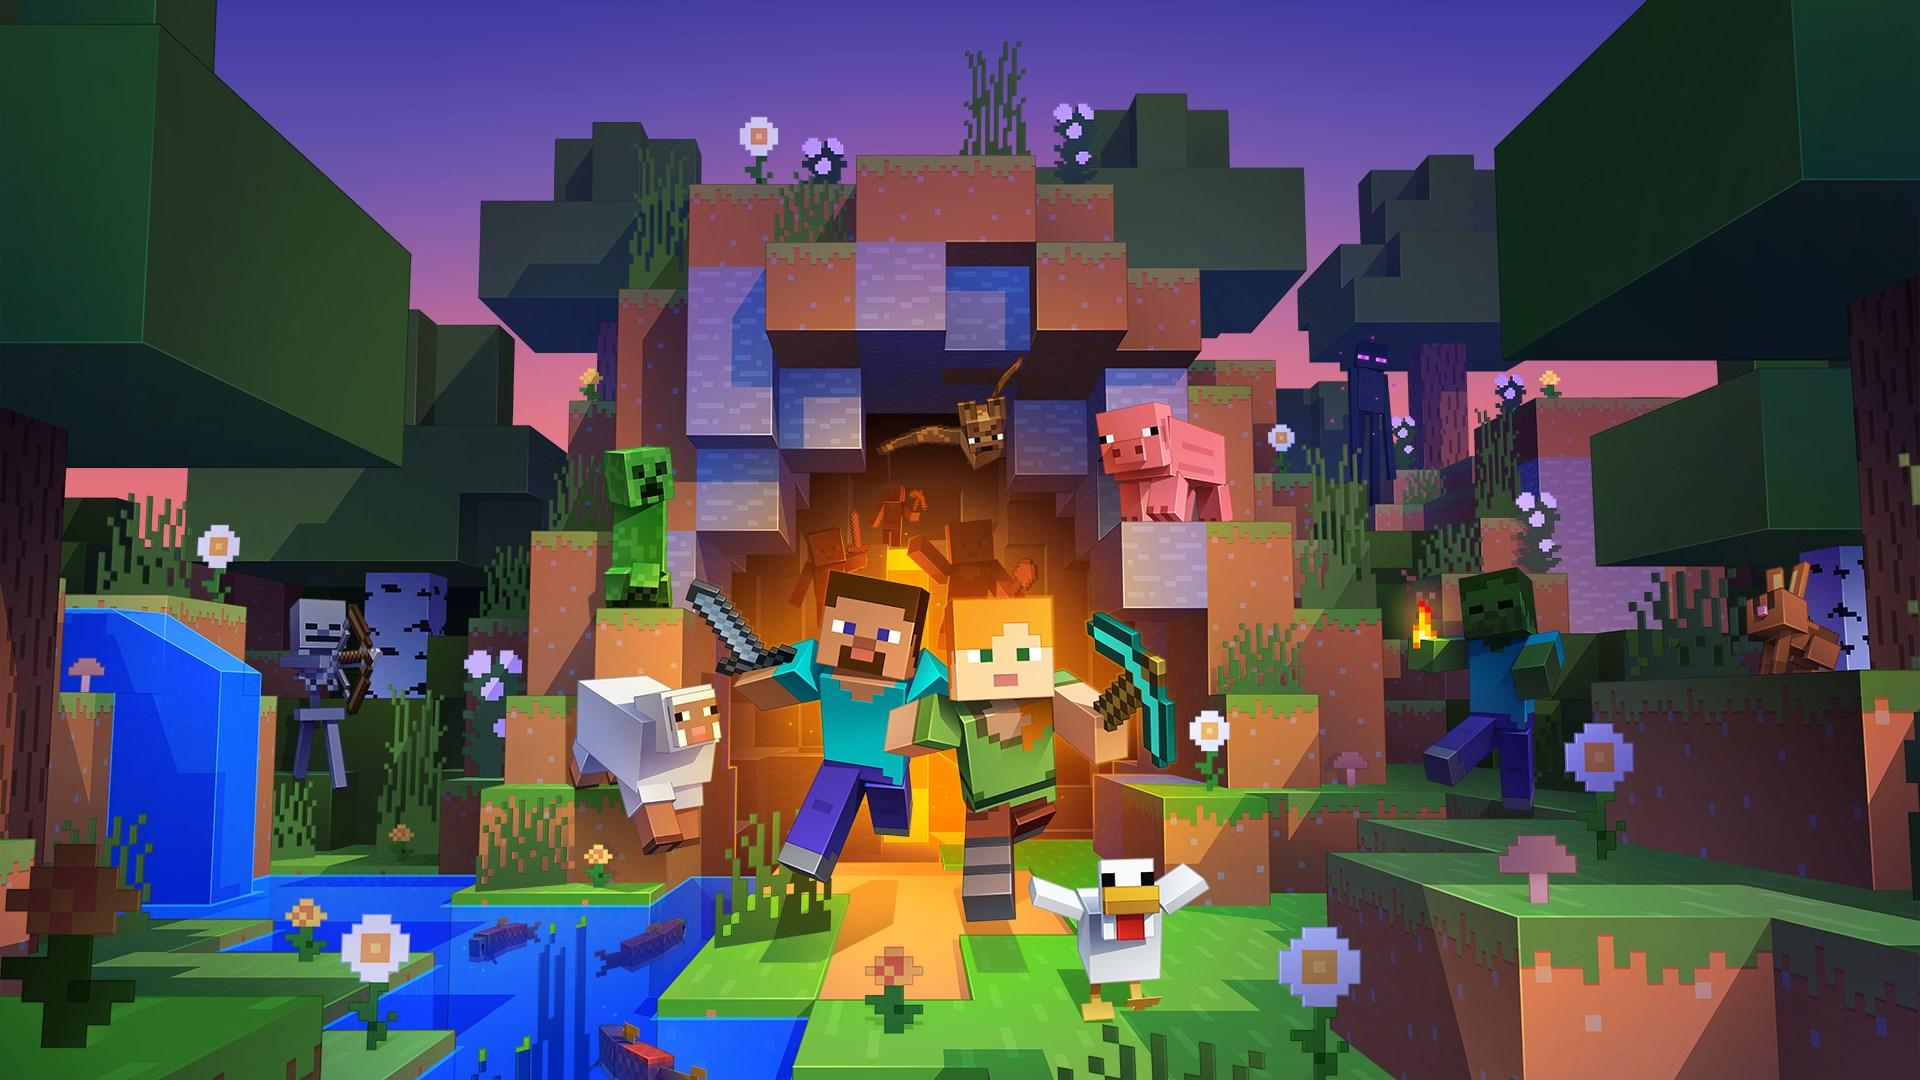 Minecraft Classic Now Available For Free In Web Browsers